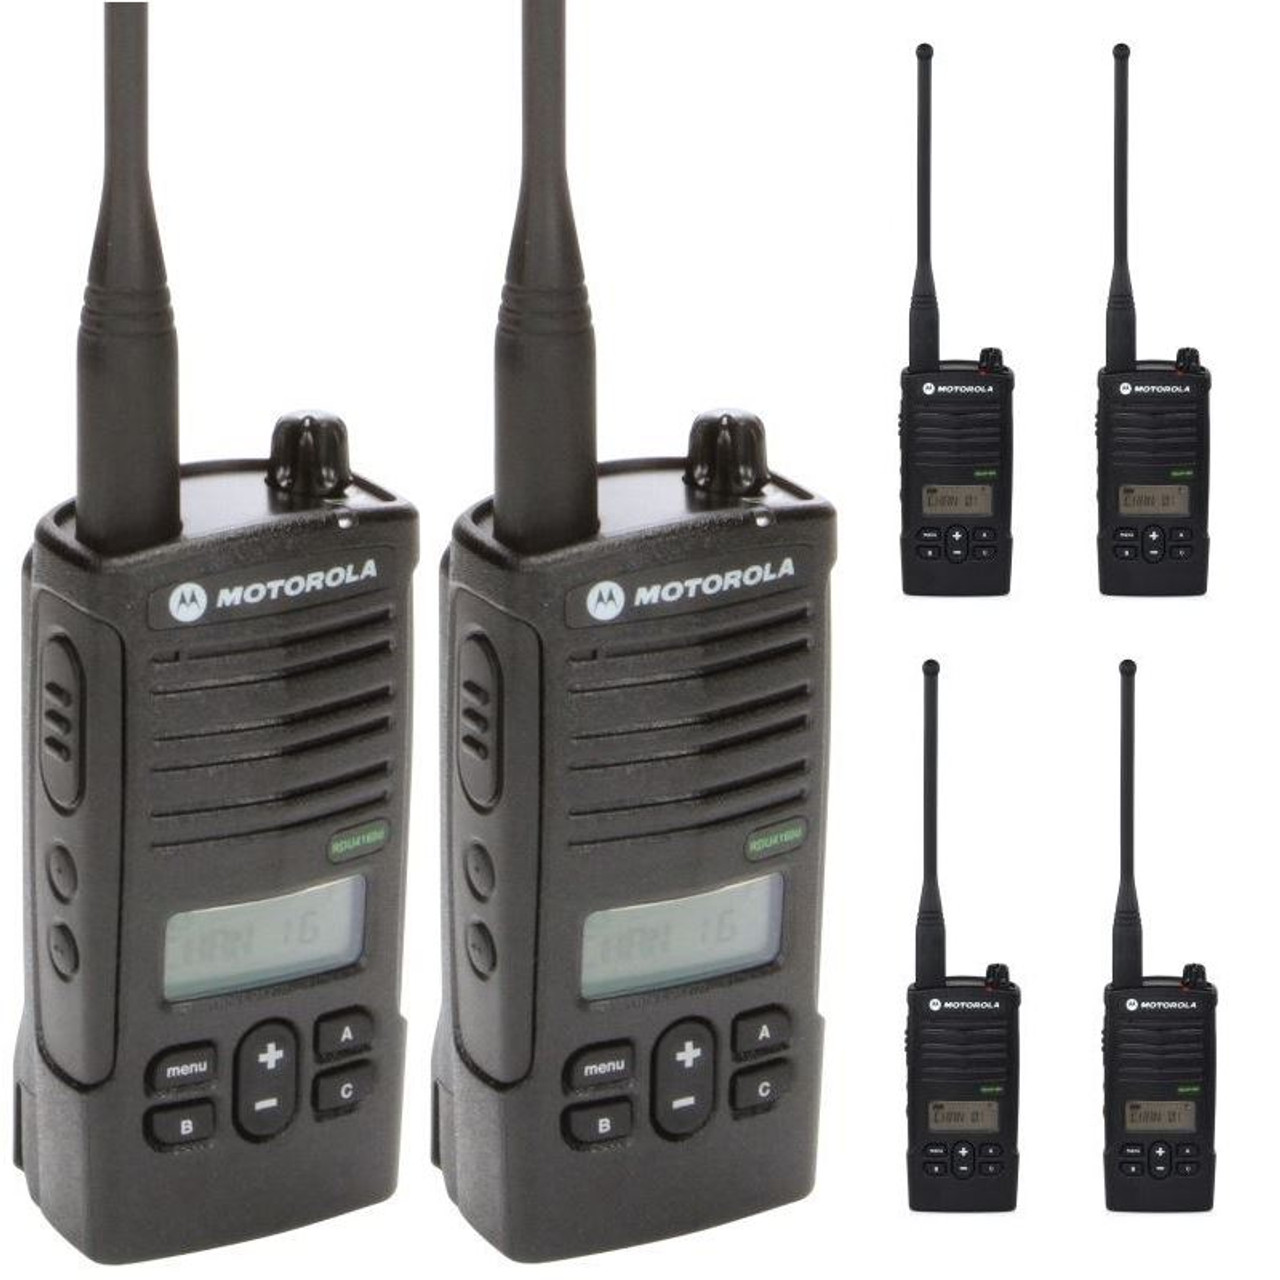 Six Pack of Motorola RDU4160D radios will give you an easy to read Display  and is Watts. This radios is a workhorse and gets the job done. Perfect  for construction sites,